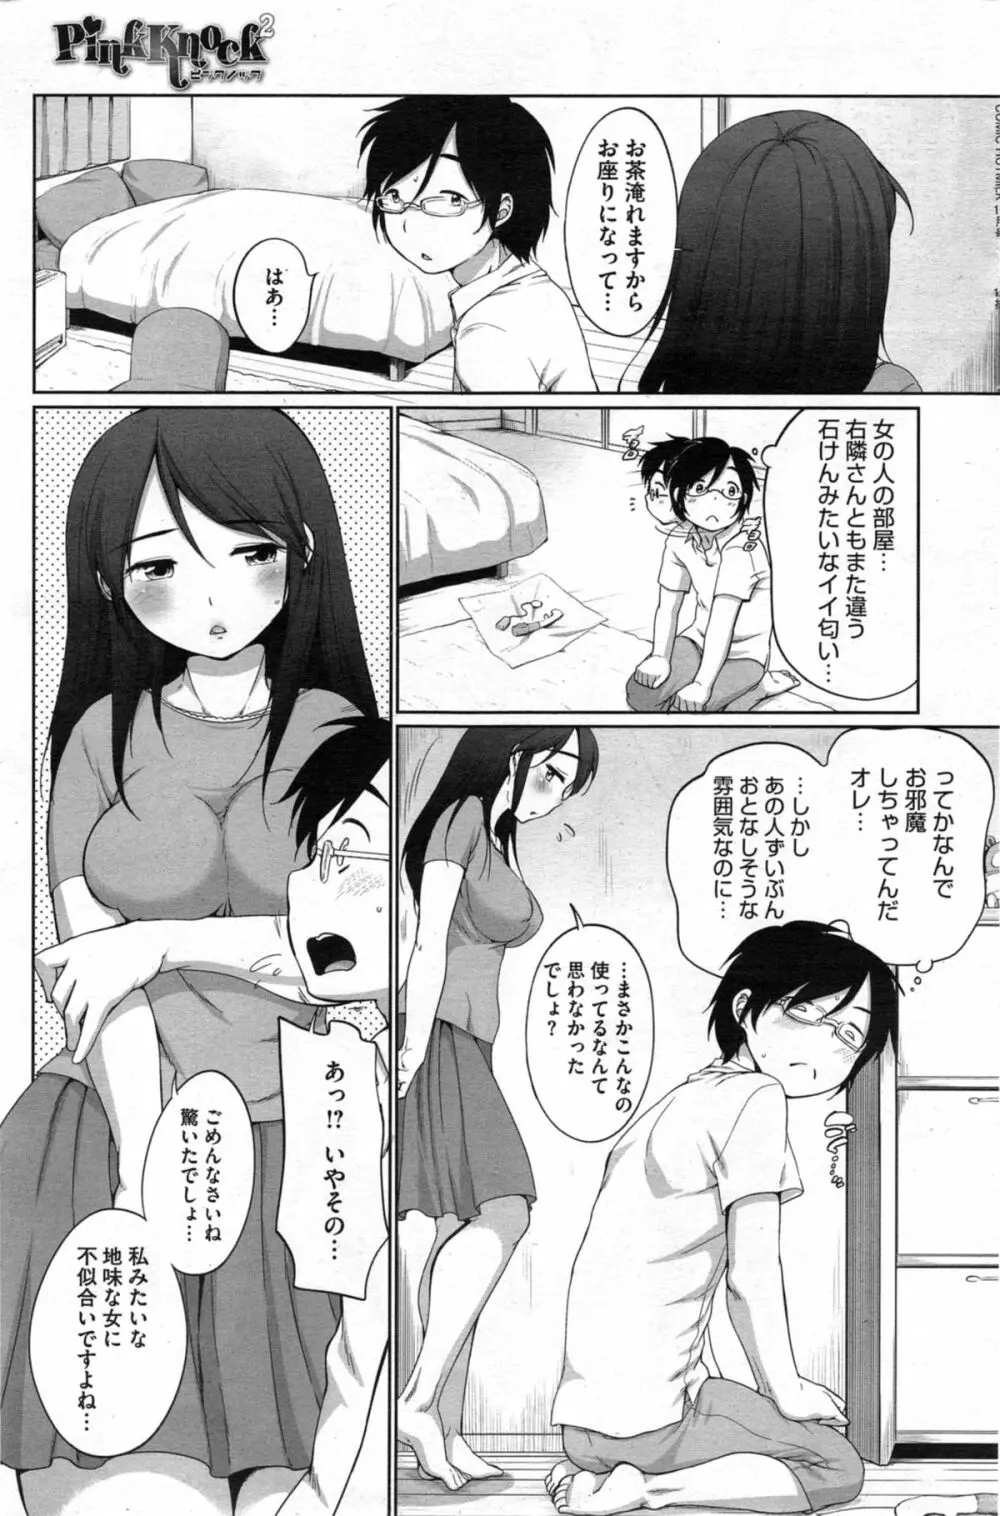 PinkKnock 第1-3章 Page.23